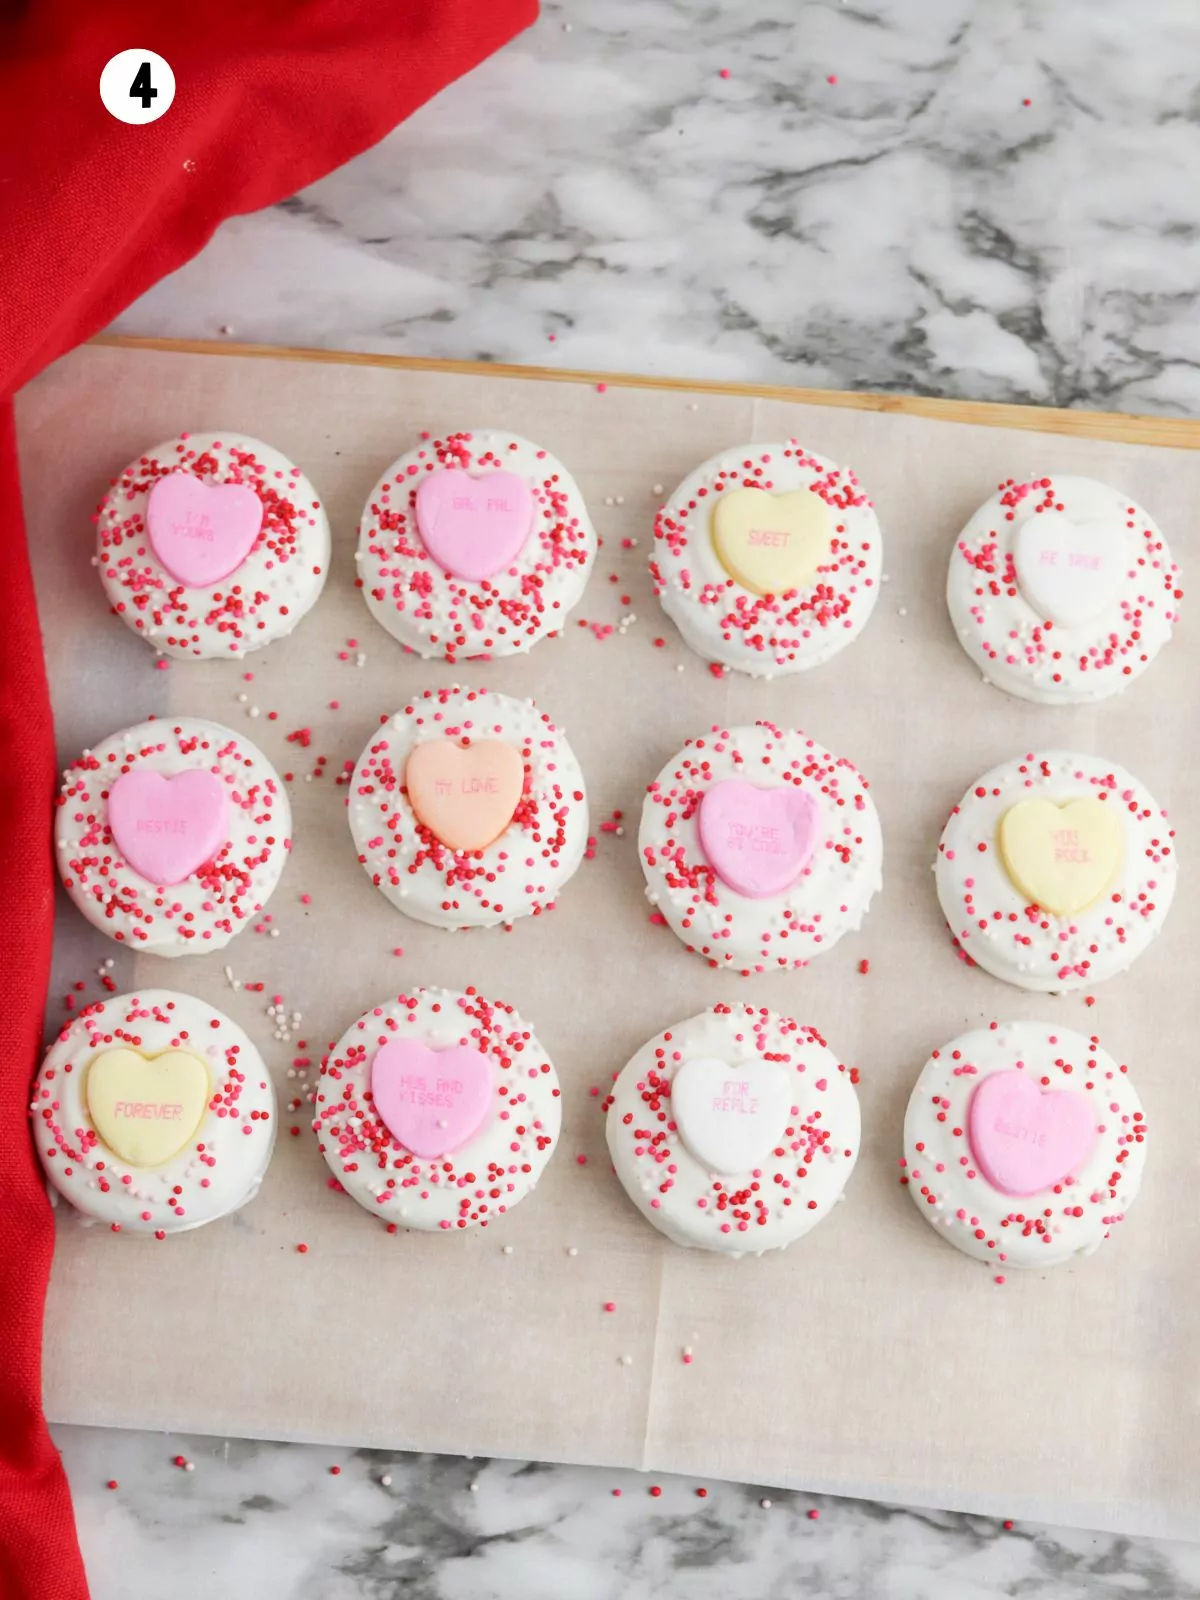 white chocolate covered Oreos with conversation heart candies.